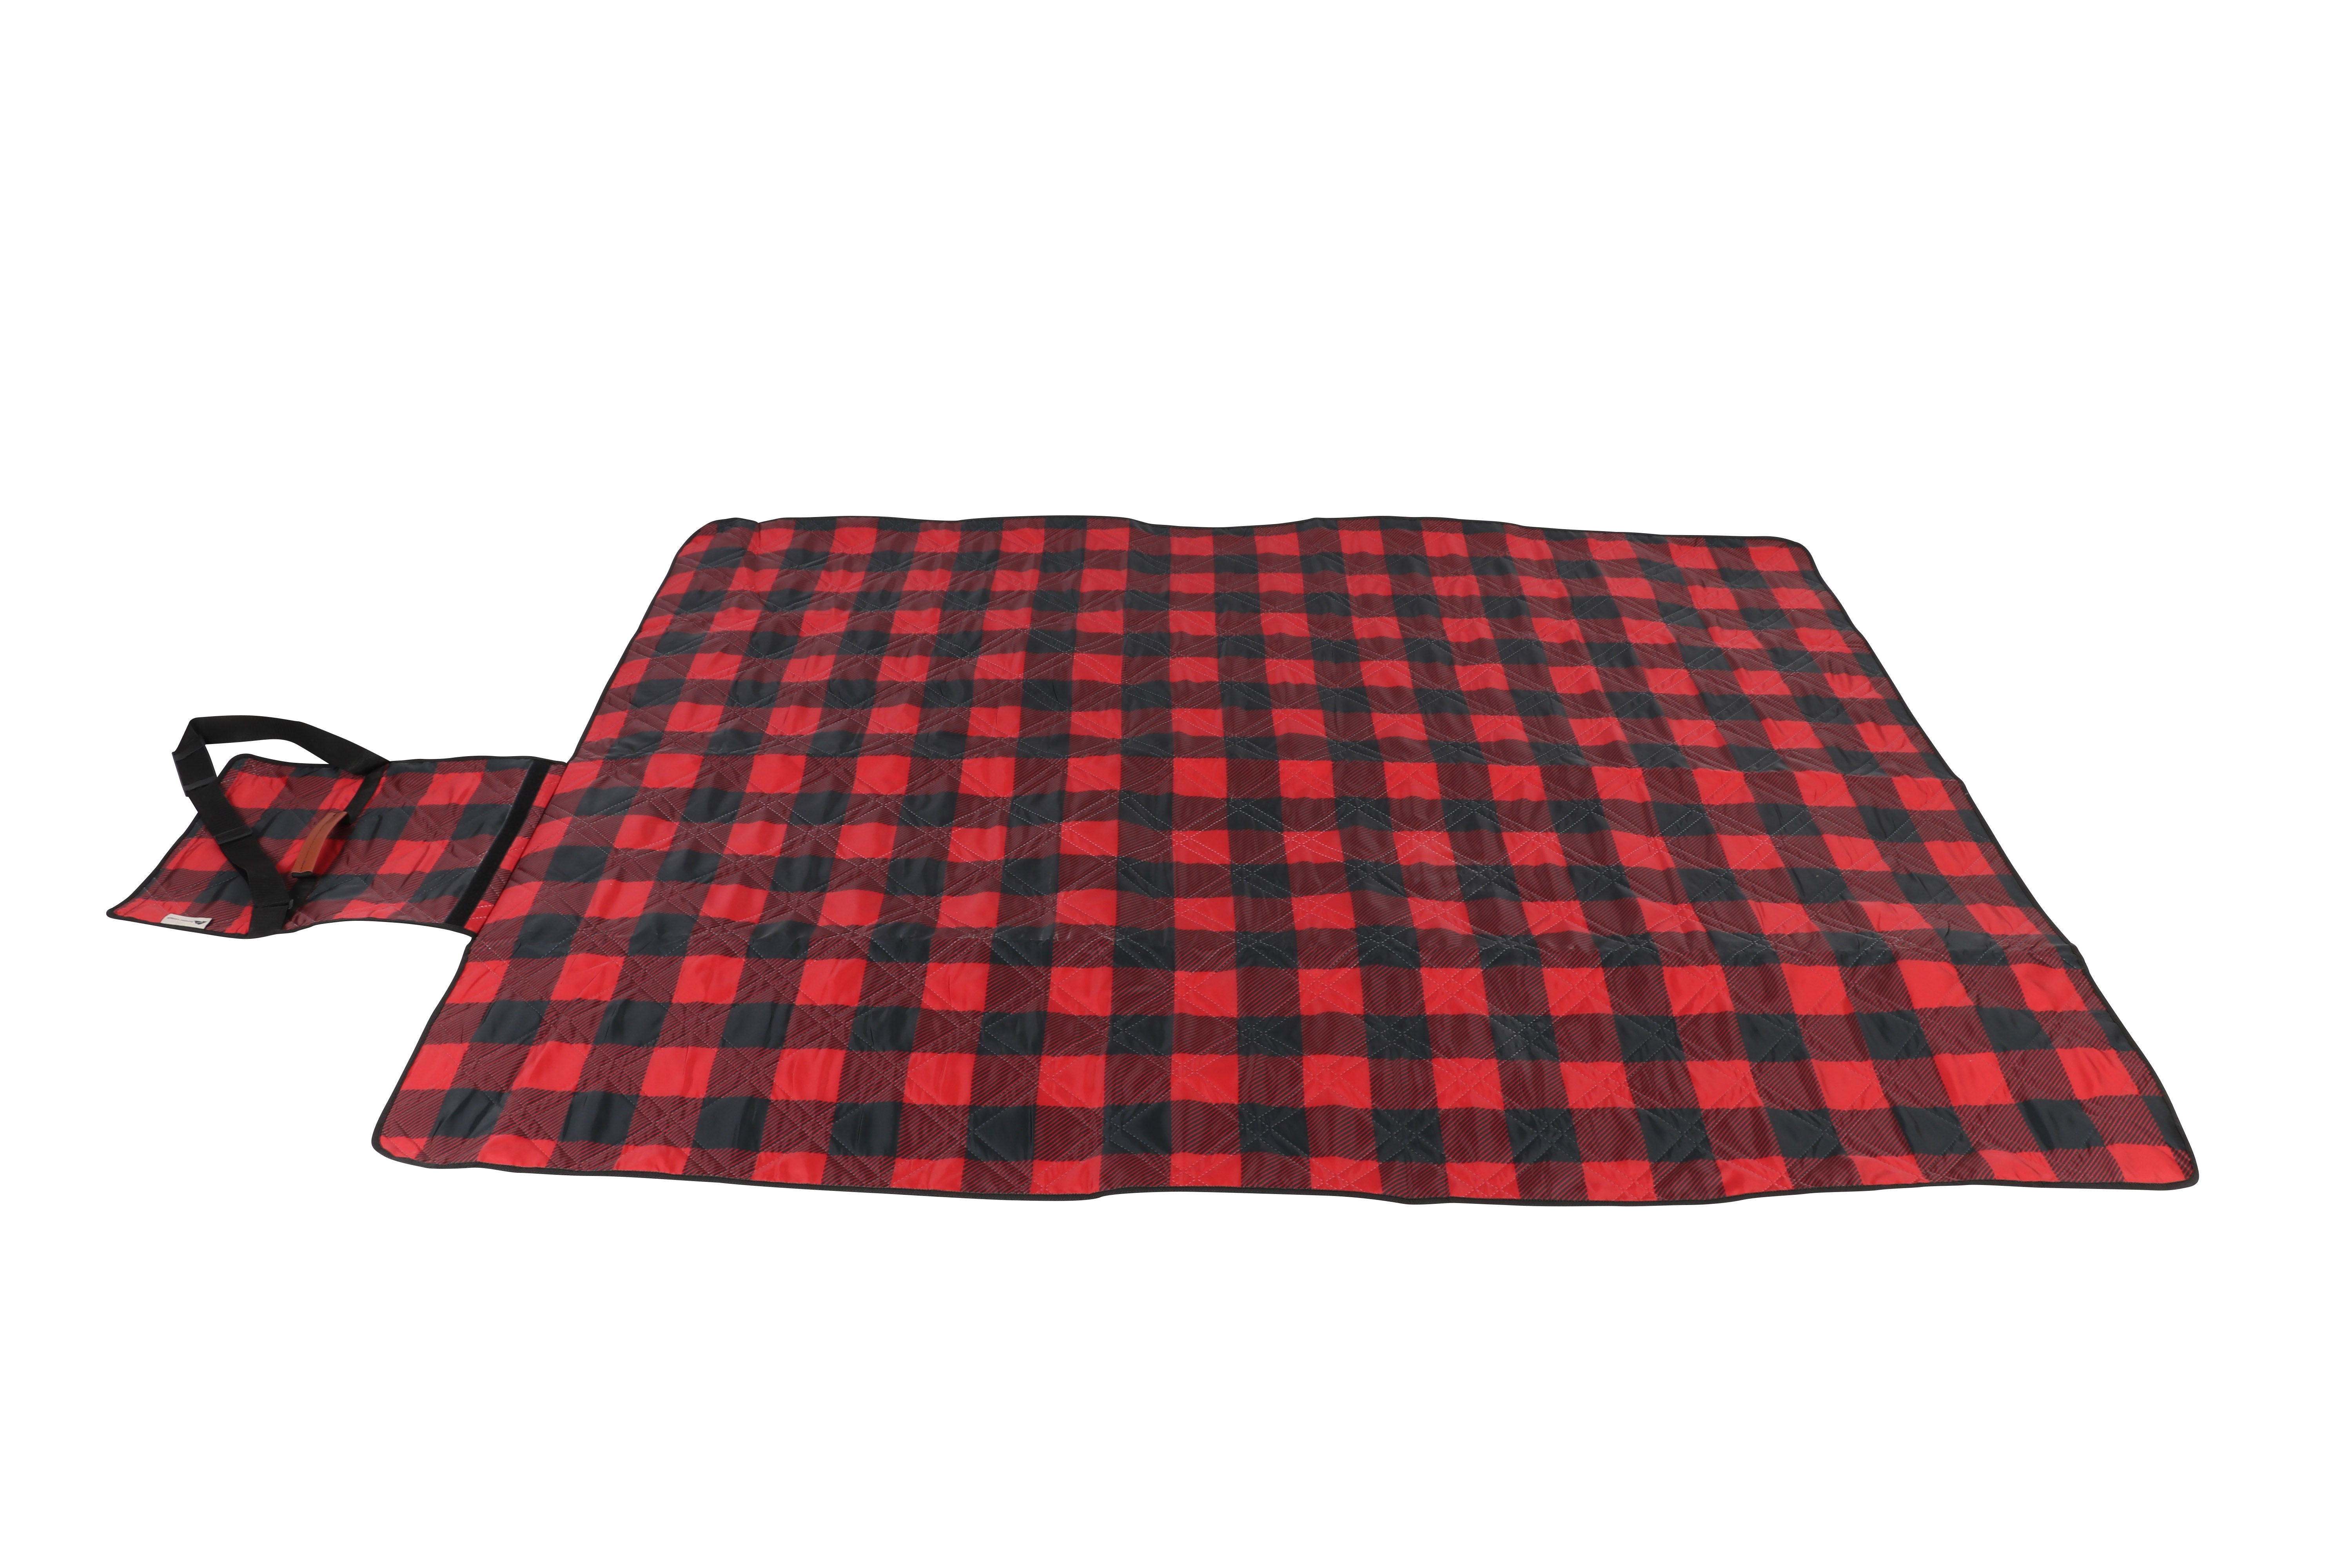 Ozark Trail 3 Piece Buffalo Plaid Camping Chairs and Blanket Combo, Red - image 6 of 6